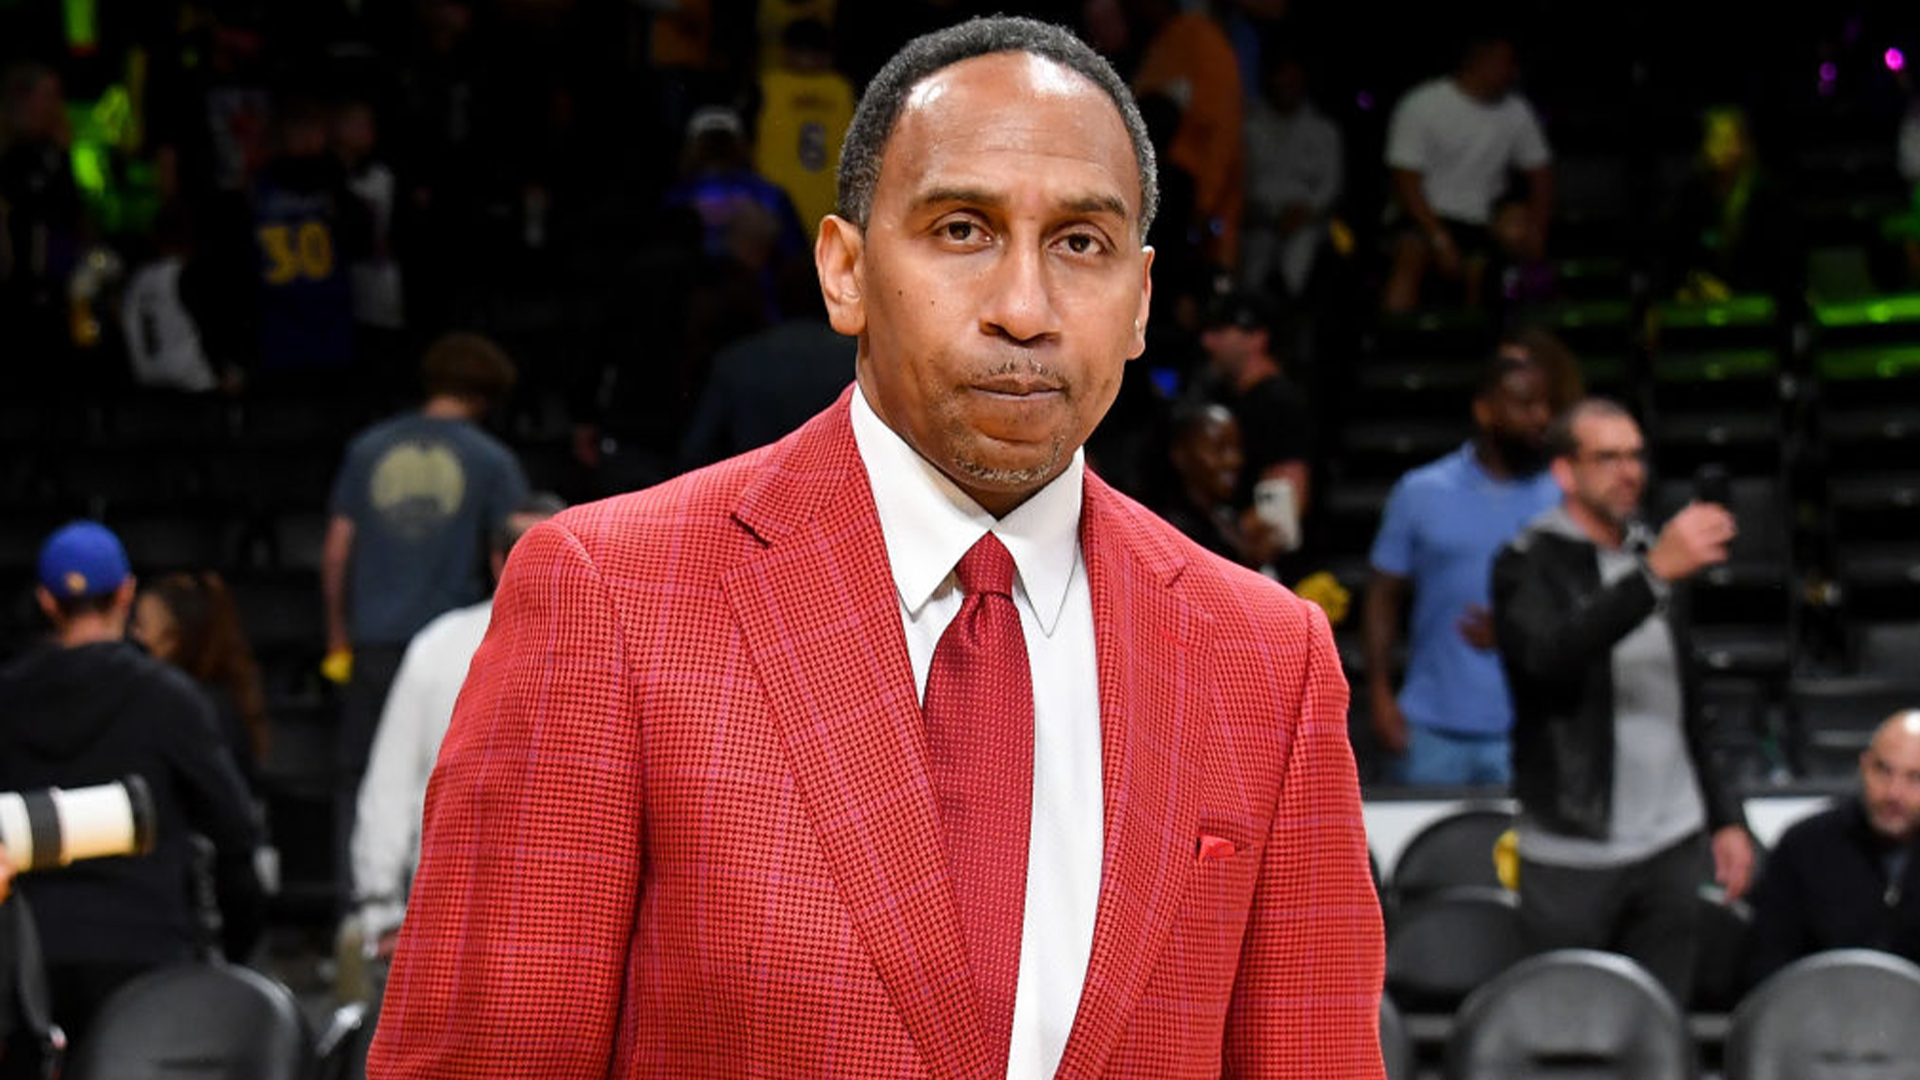 When Stephen A. Smith Signed A $1.3M Contract To Receive His Own ESPN Show, He Retired His Late Mother